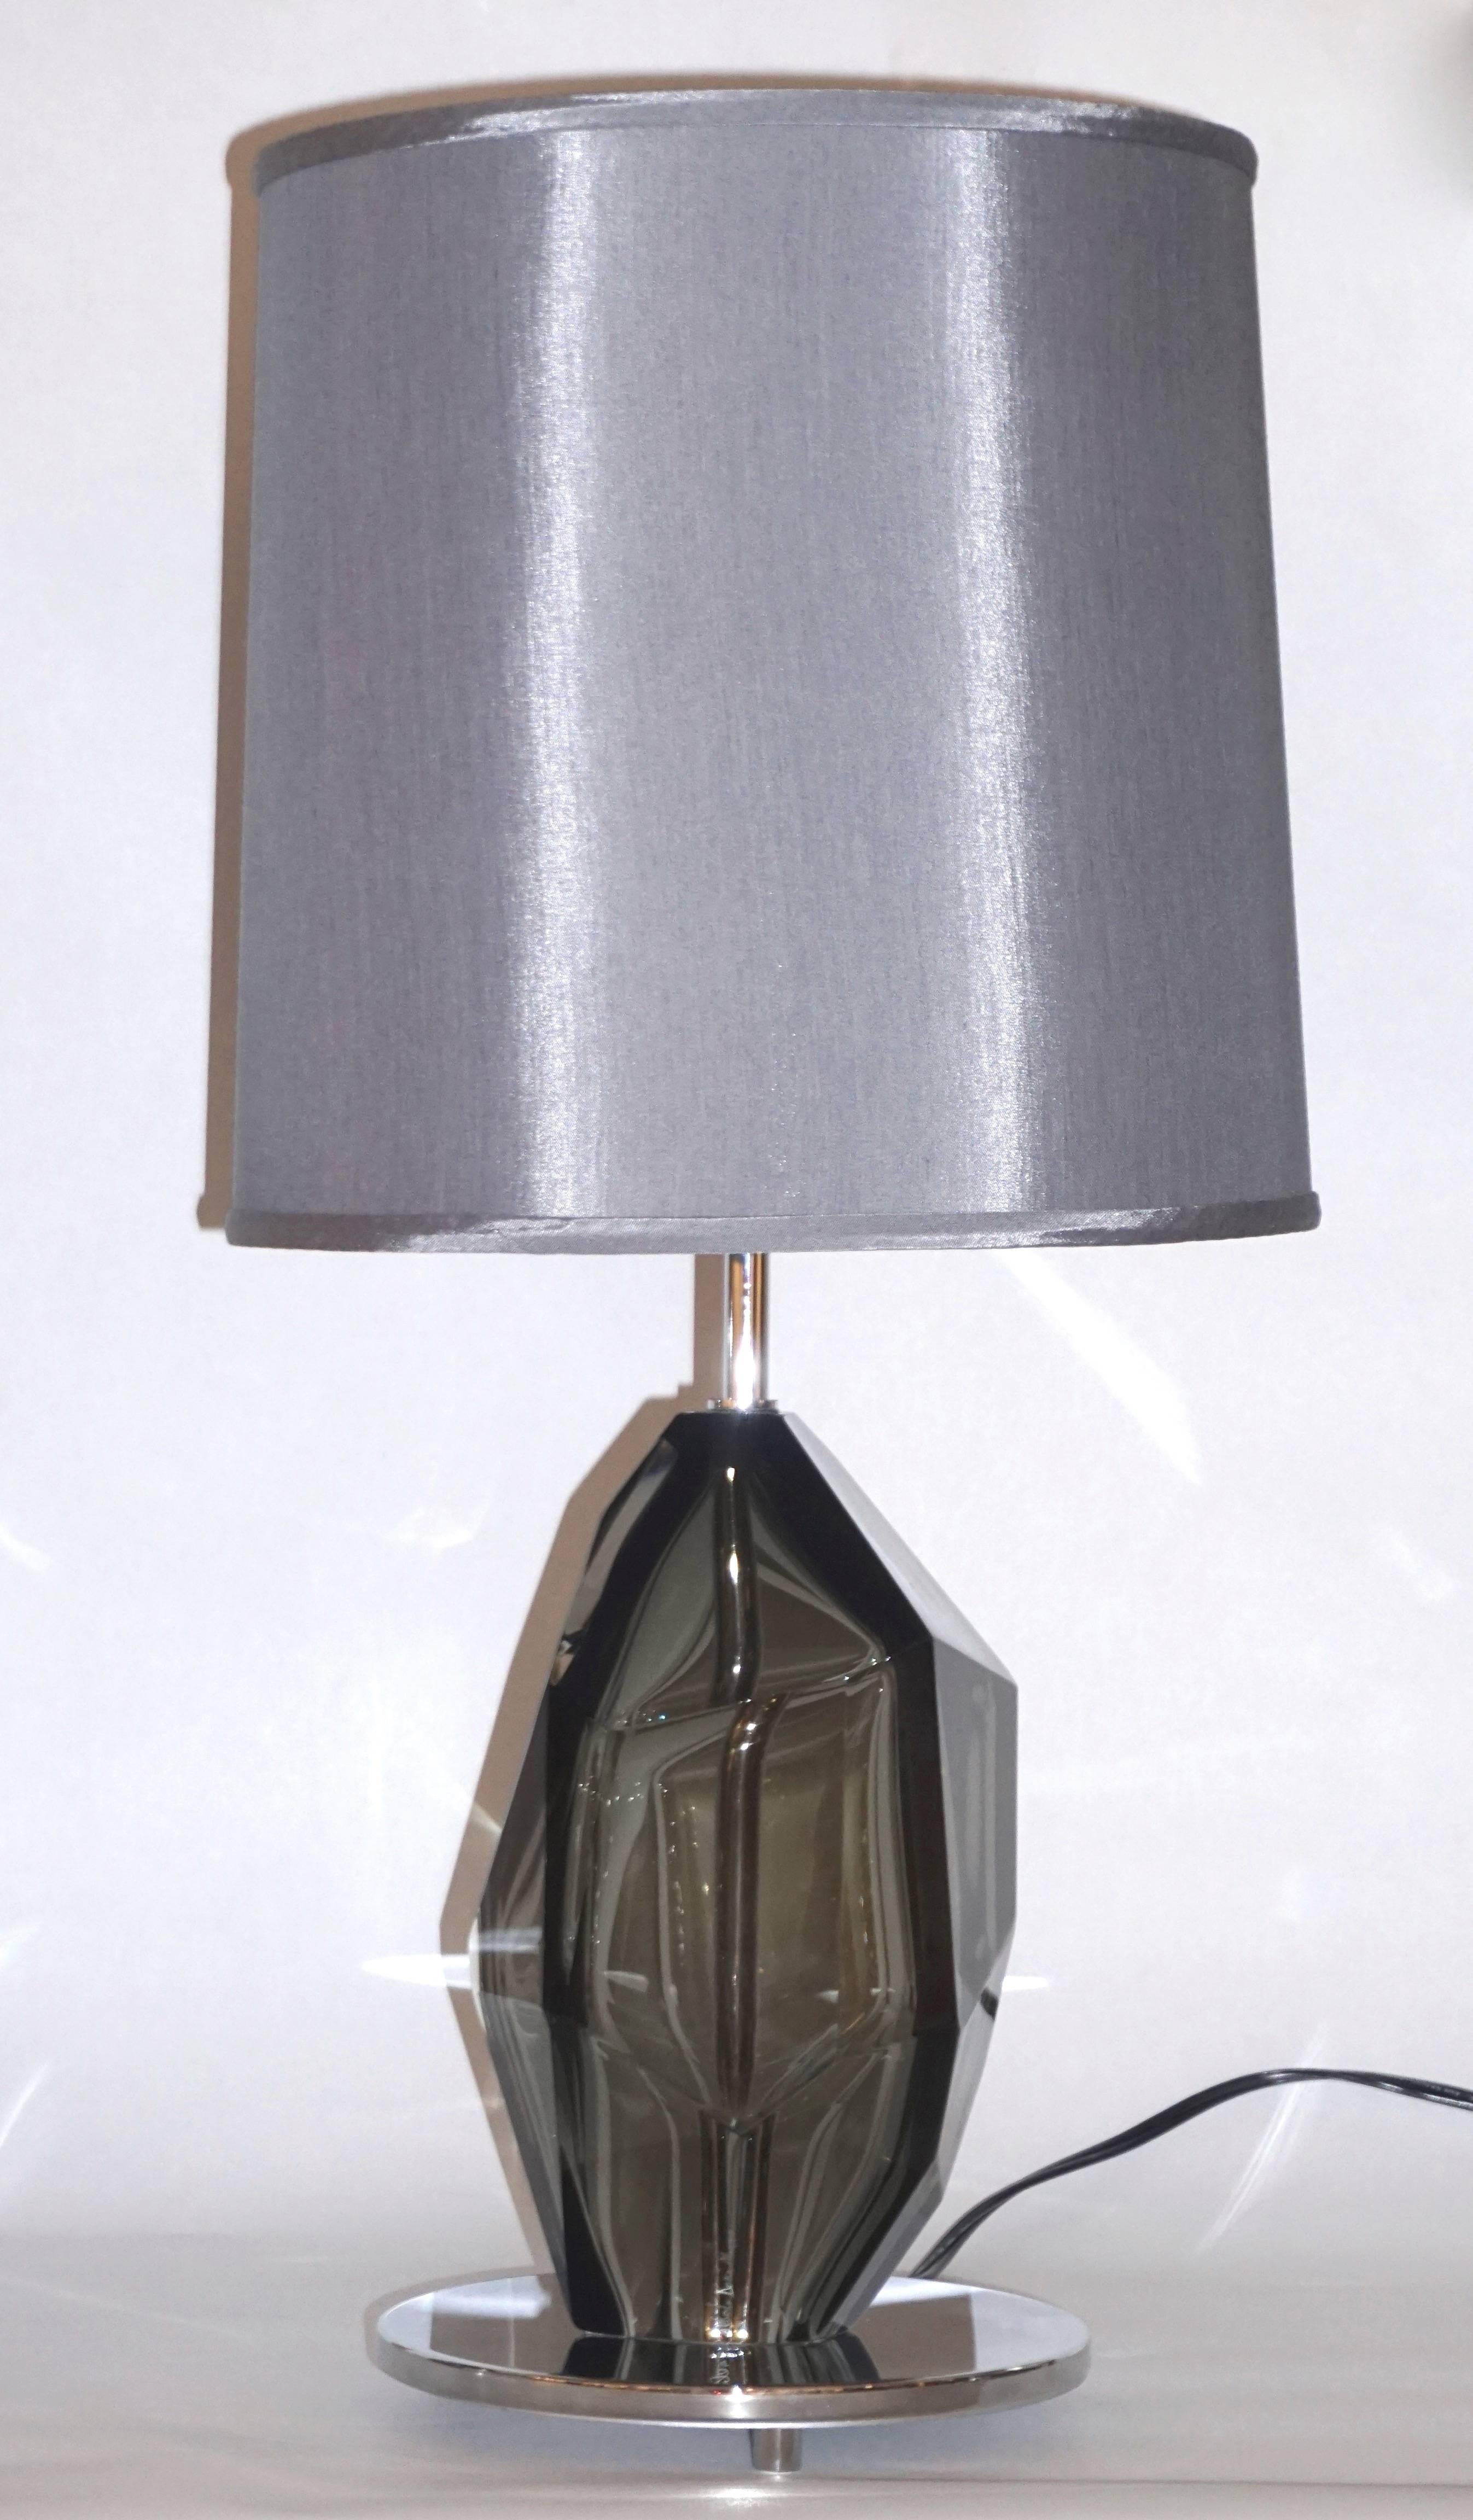 Donà Contemporary Italian Faceted Solid Rock Smoked Murano Glass Lamp In Excellent Condition For Sale In New York, NY